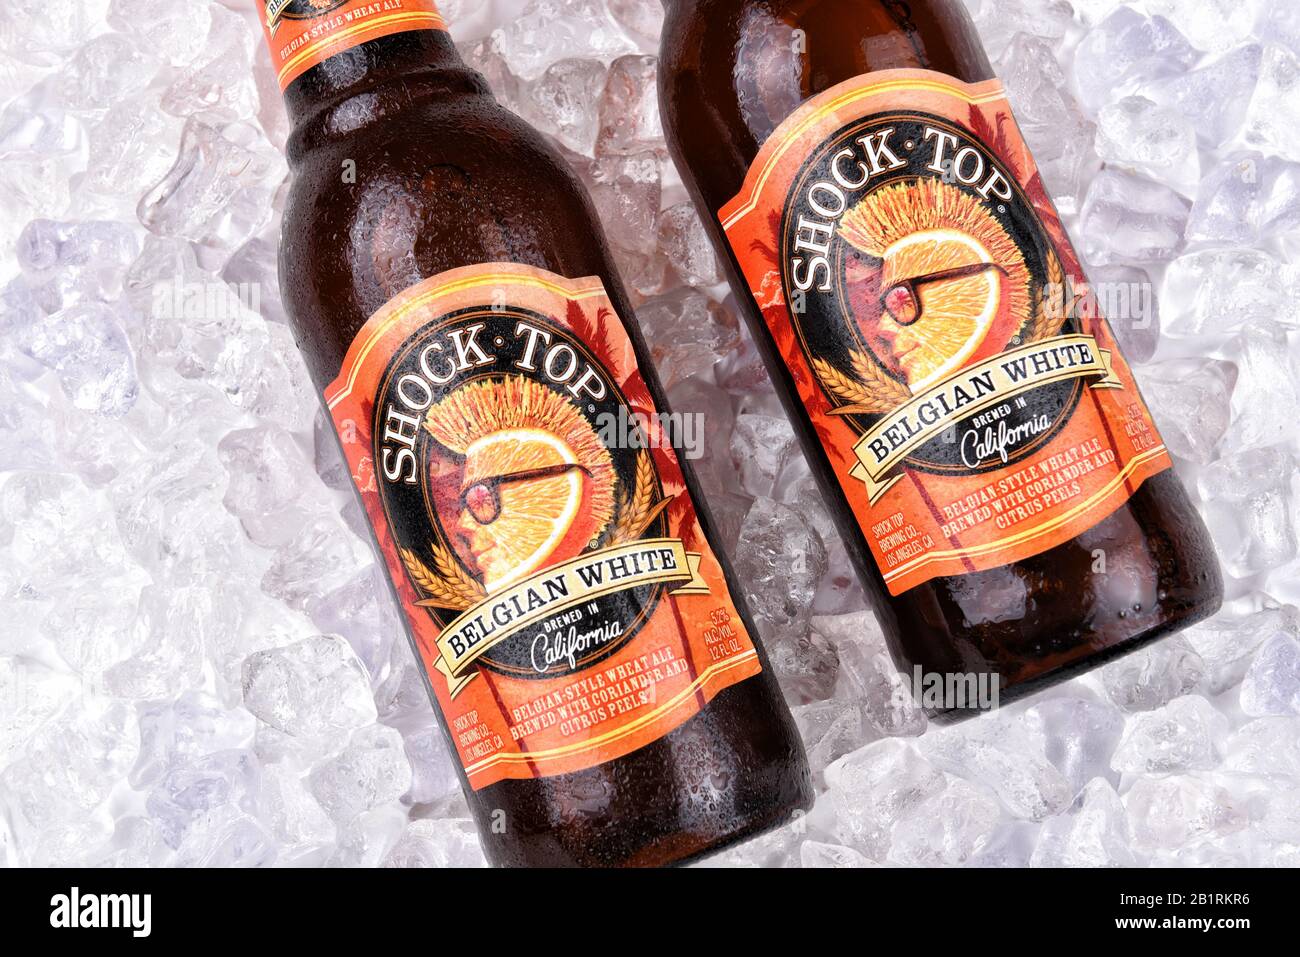 IRVINE, CALIFORNIA - AUGUST 25, 2016: Shock Top Belgian White bottles in ice. Introduced as a seasonal beer in 2006, it has, since 2007, been availabl Stock Photo